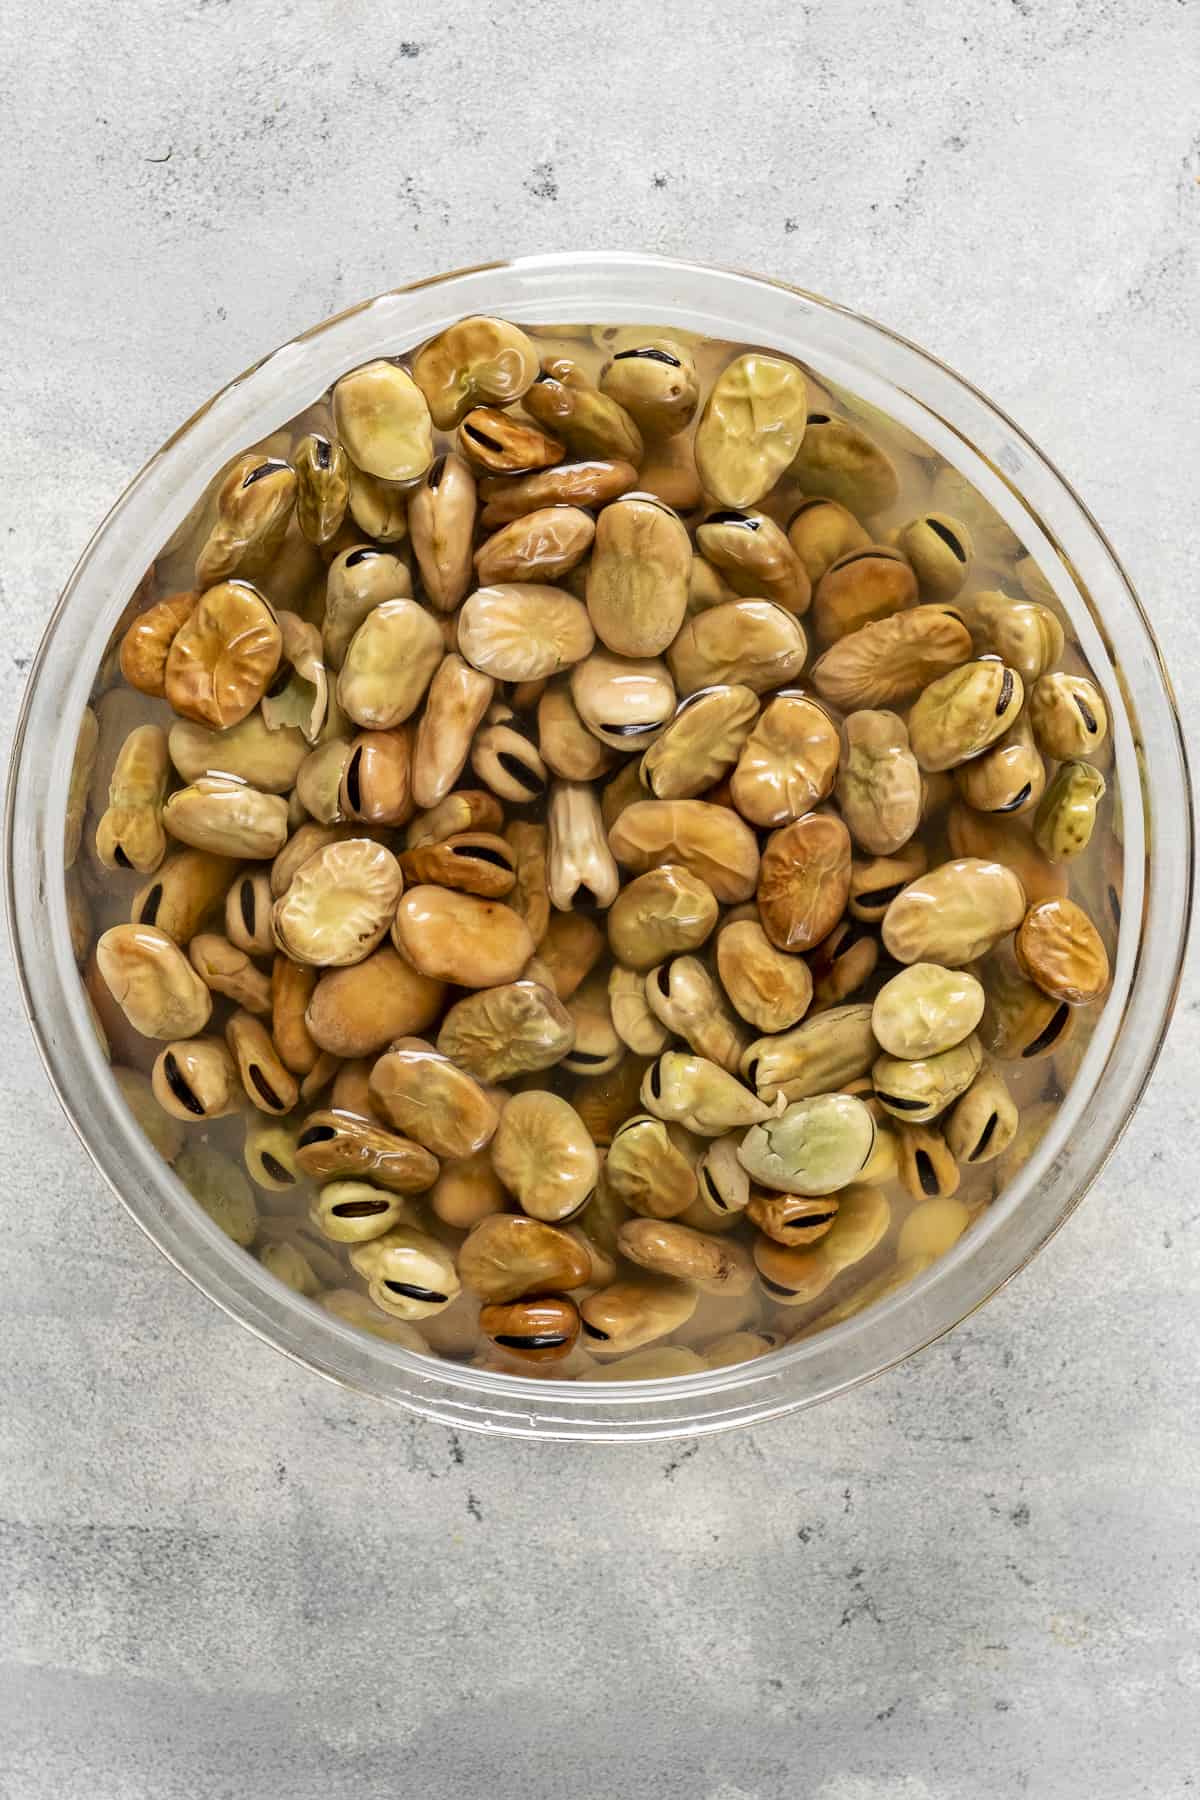 Dried fava beans soaking in a large glass bowl.